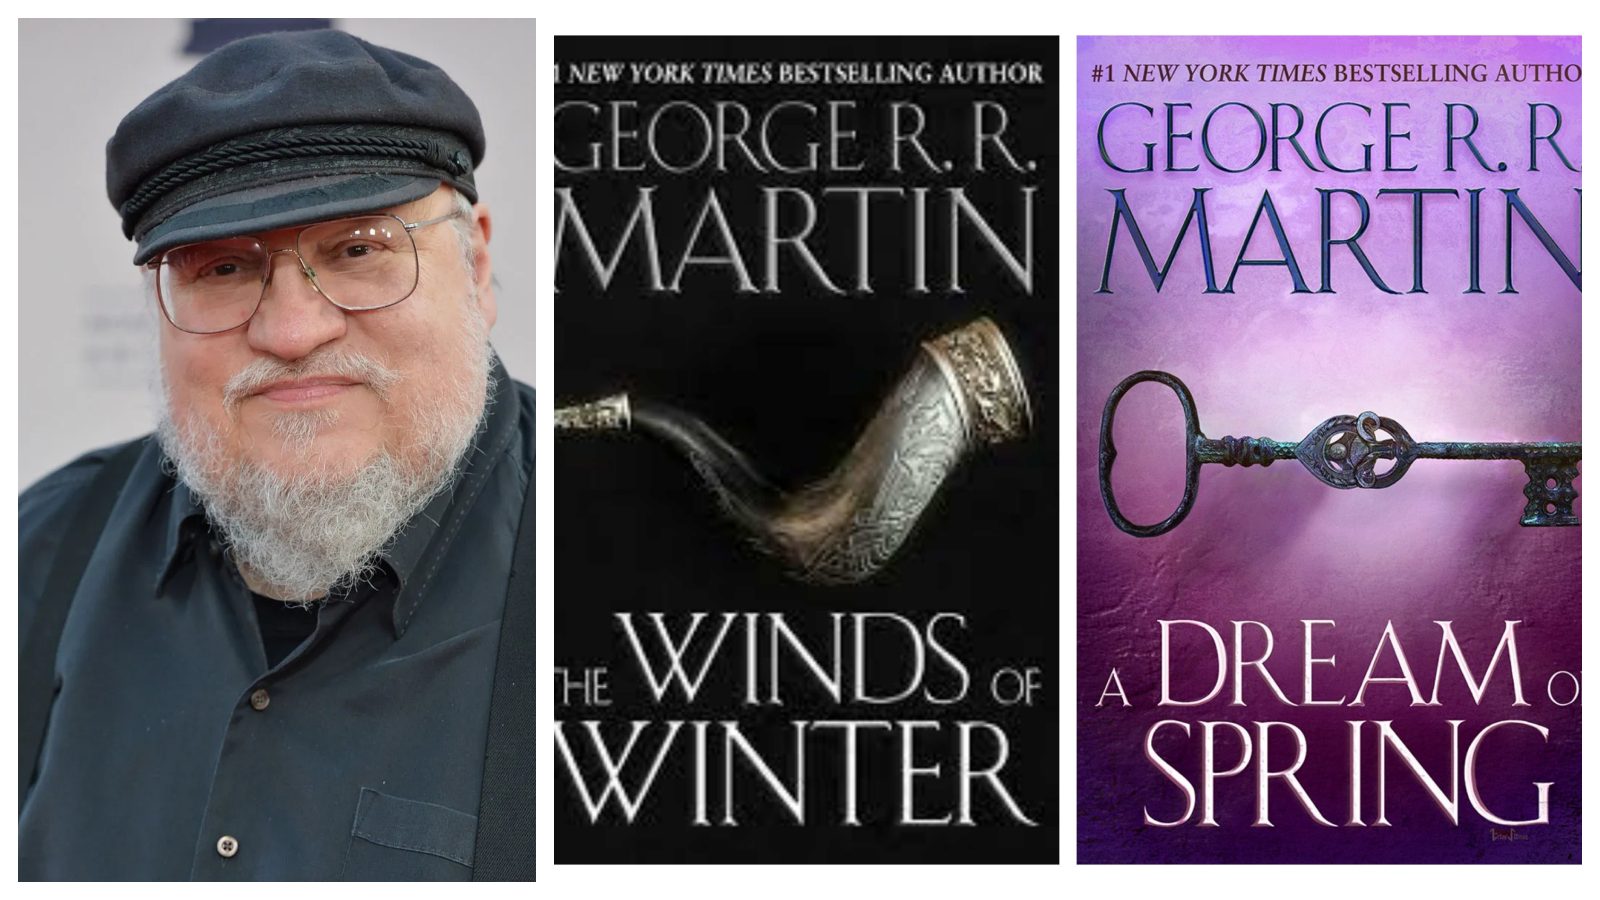 George R.R. Martin; The Winds of Winter; A Dream of Spring